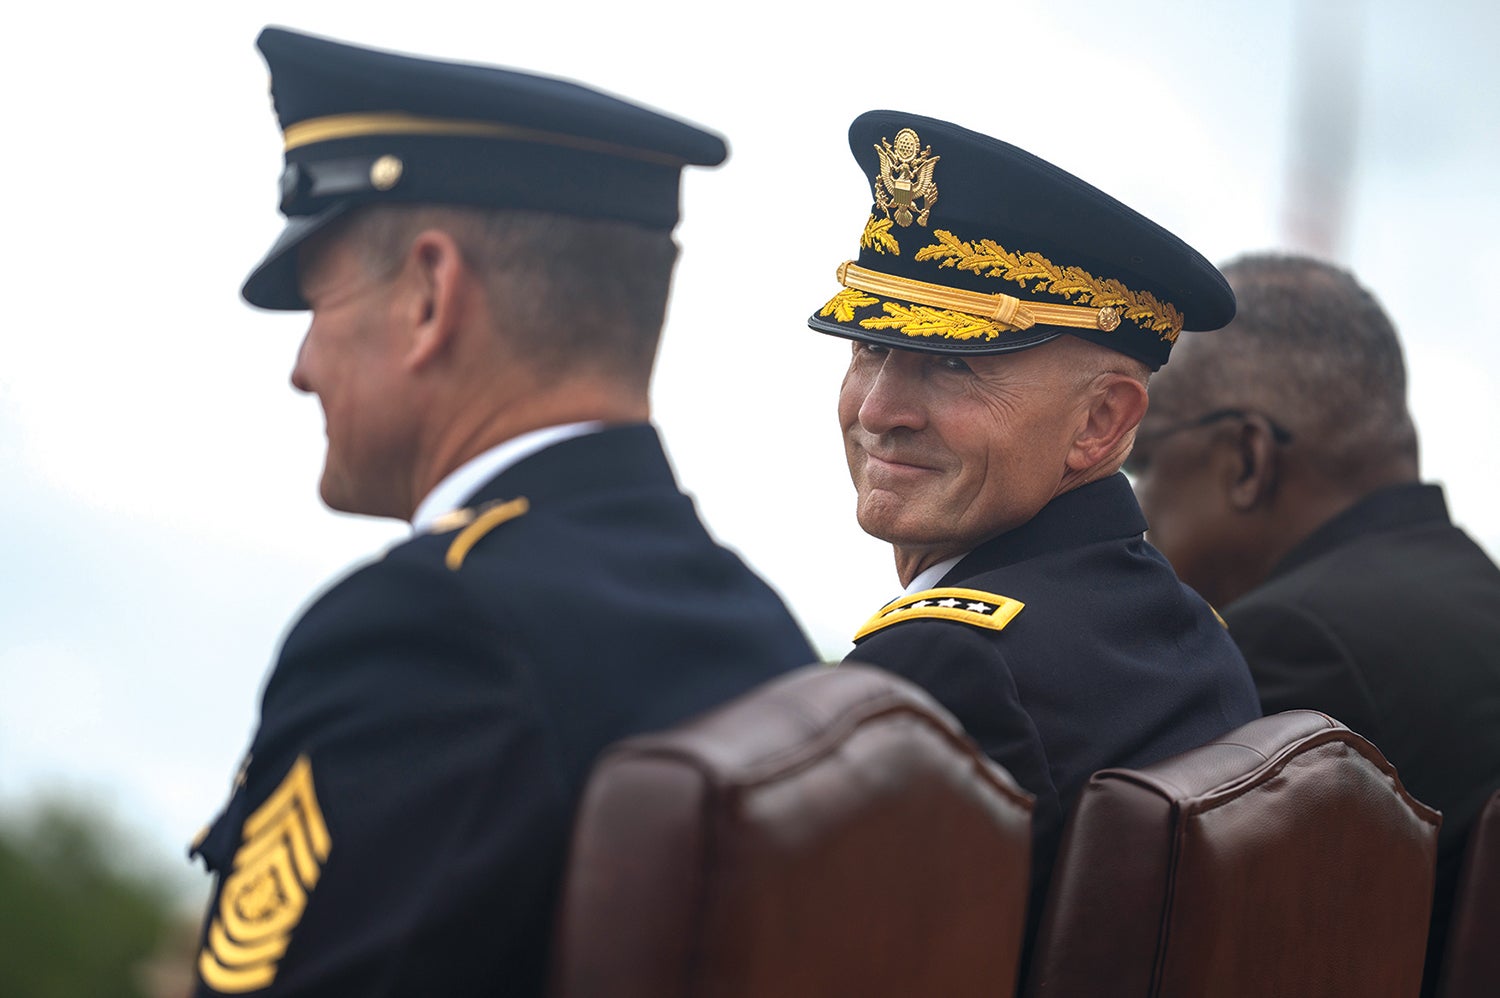 Army Vice Chief of Staff Gen. Randy George smiles during the chief of staff of the Army relinquishment of responsibility and sergeant major of the Army change of responsibility ceremony Aug. 4 at Joint Base Myer-Henderson Hall, Virginia. (Credit: U.S. Army/Bernardo Fuller)